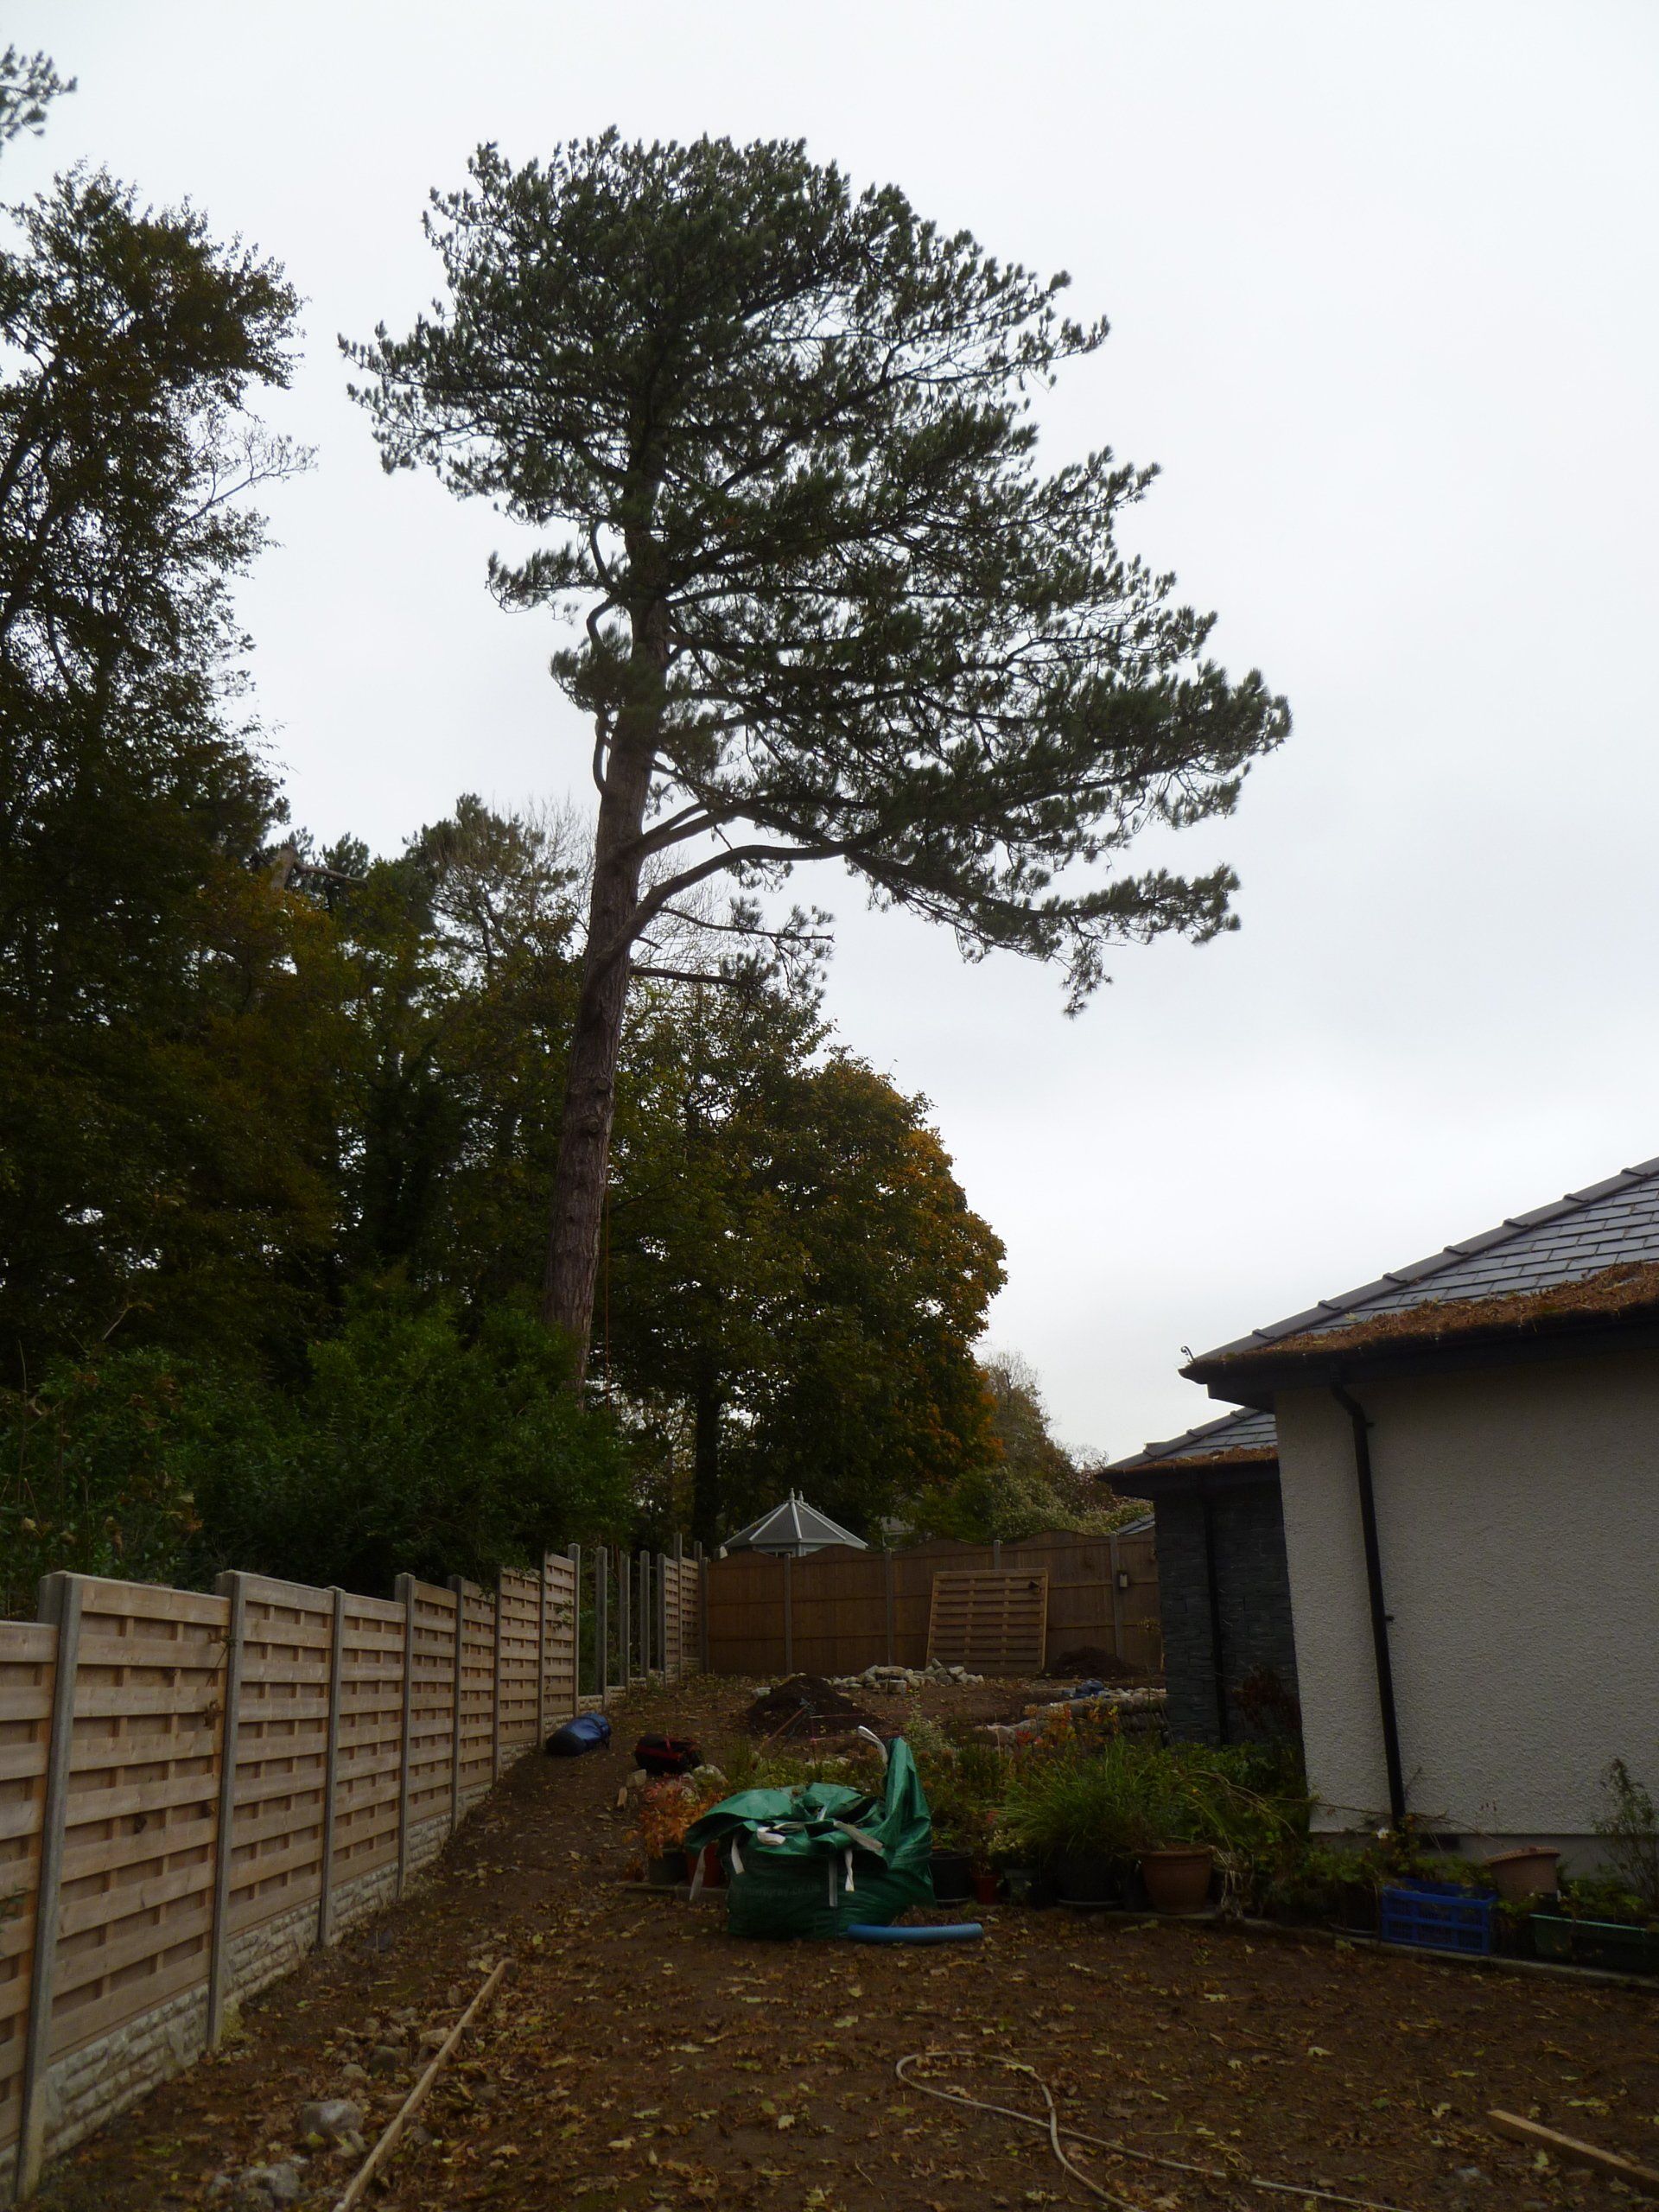 Removal of Austrian Pine in Menai Bridge on Anglesey.